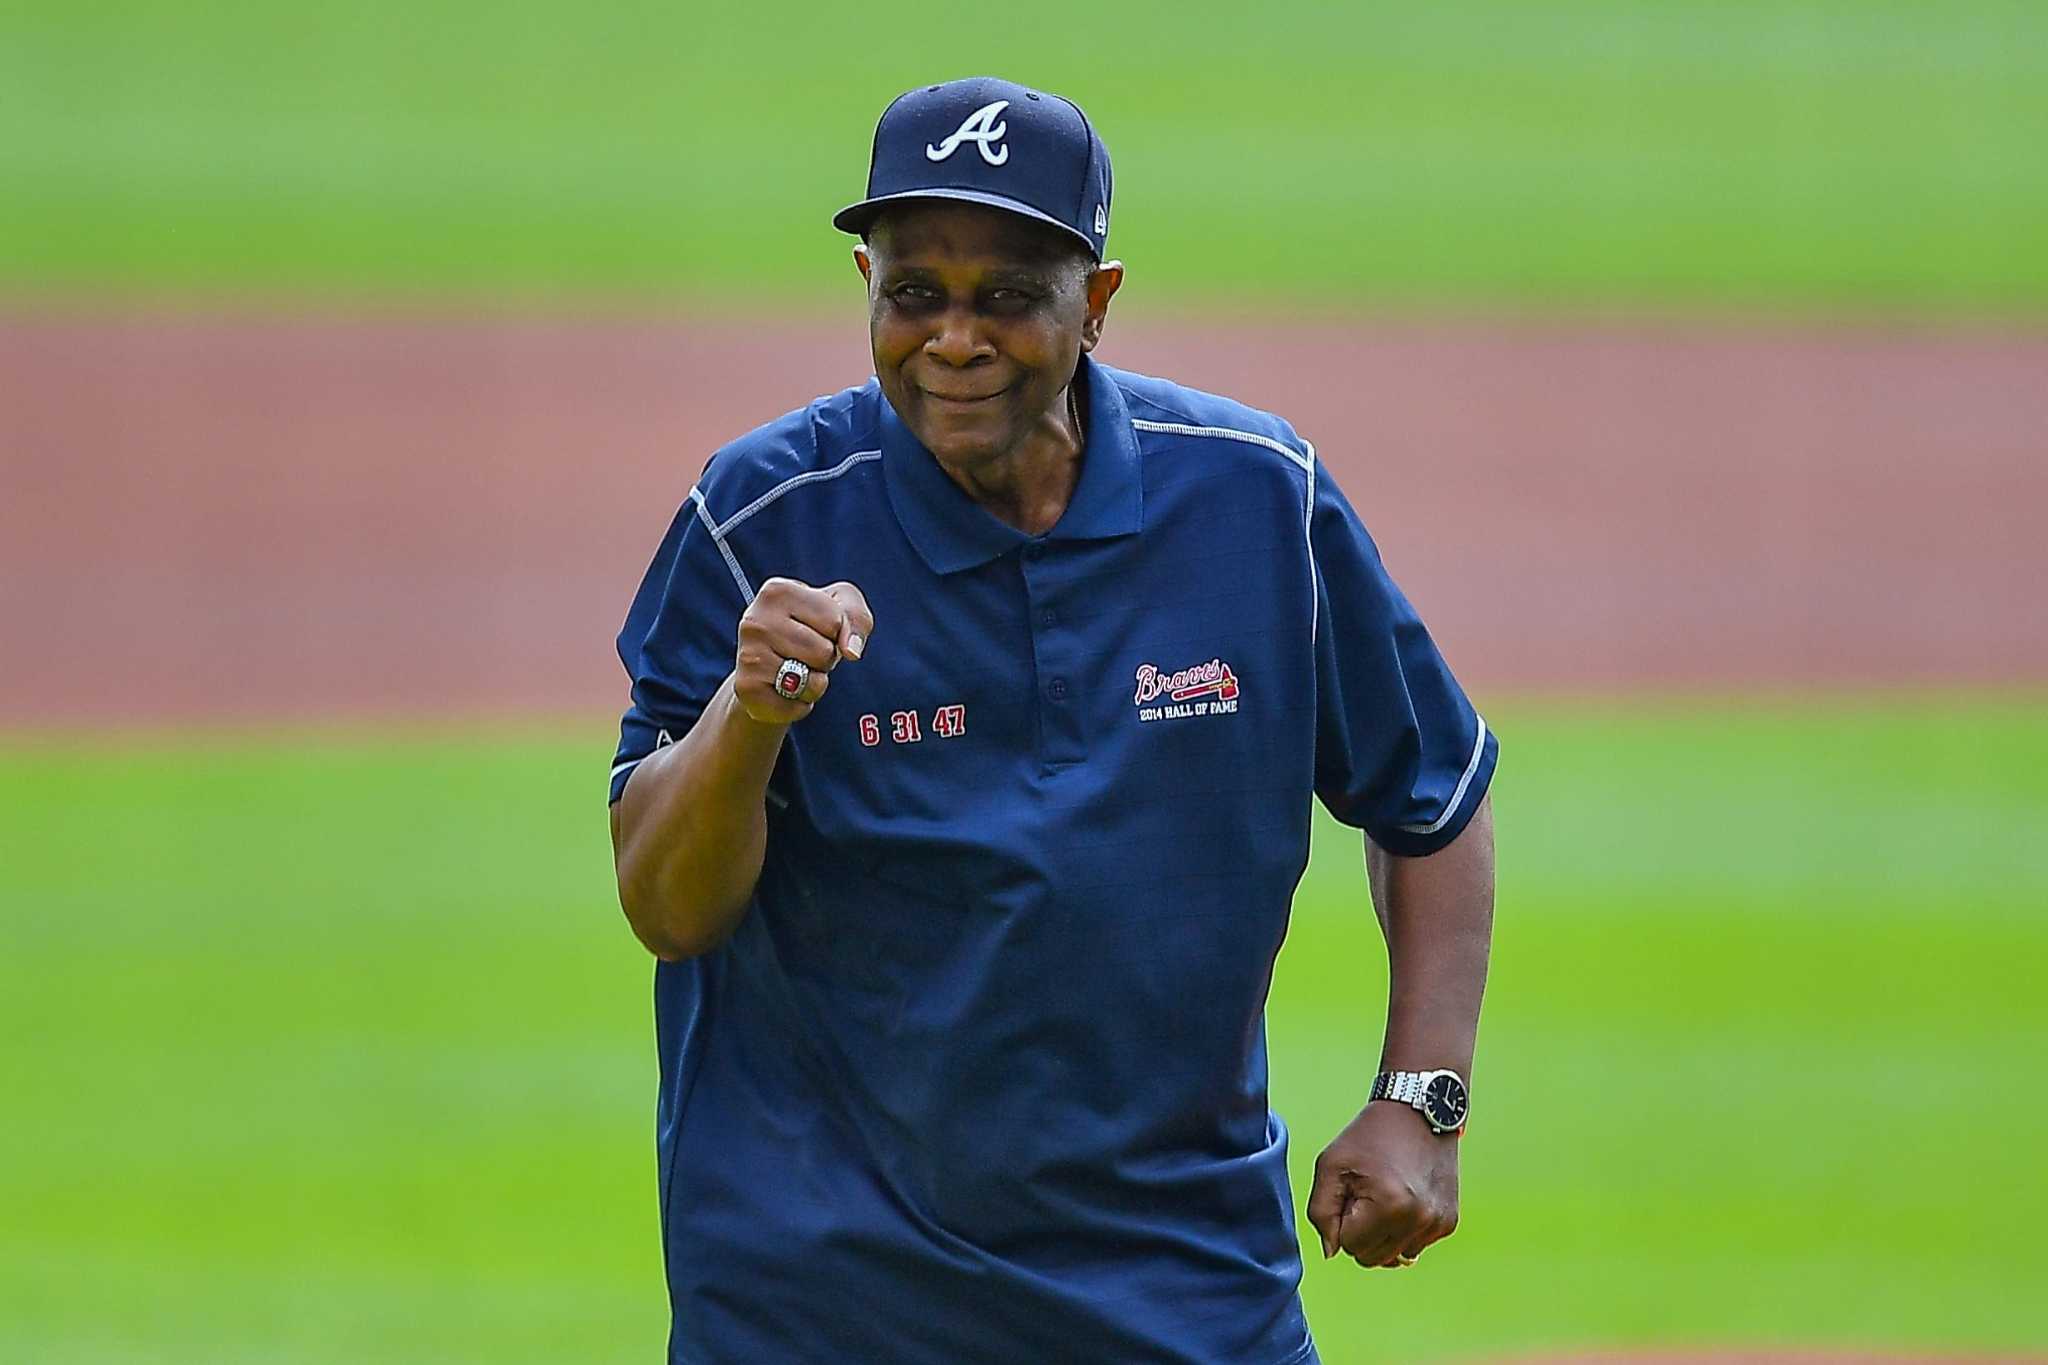 Ralph Garr and Dusty Baker: a baseball friendship with a touch of rivalry  for World Series